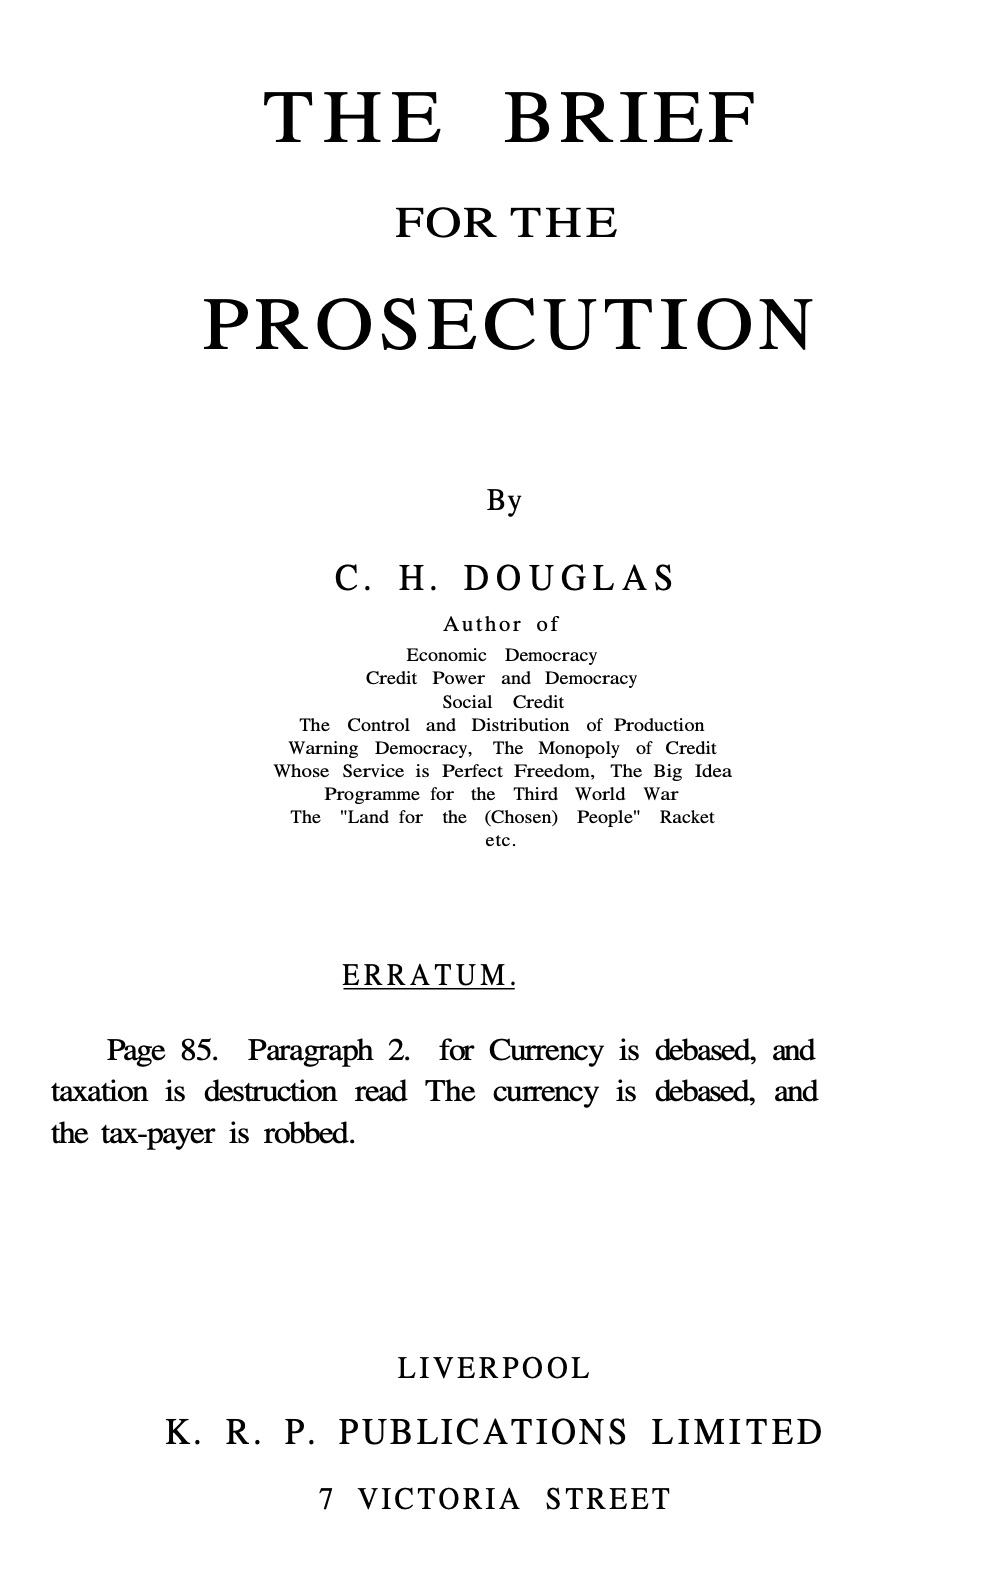 The Brief for the Prosecution (1945) by Clifford Hugh Douglas, 1879-1952